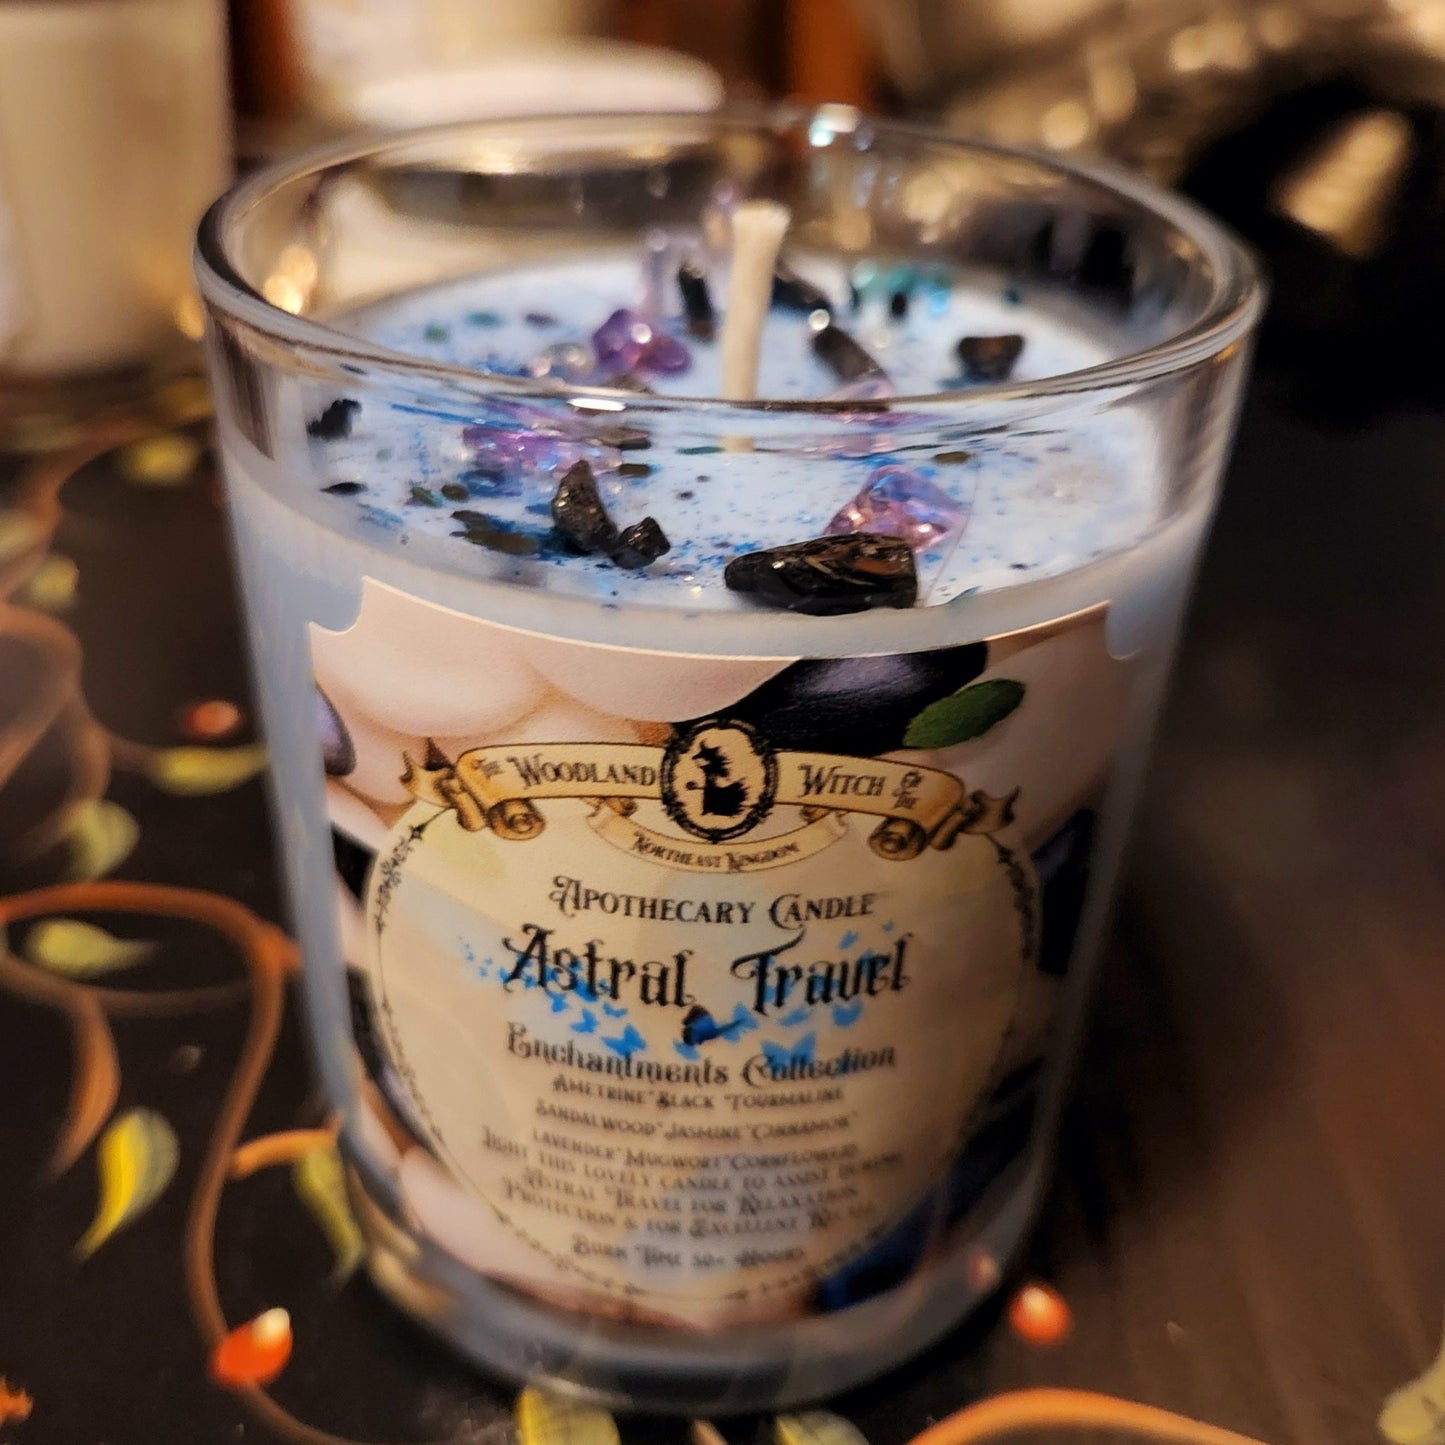 ASTRAL TRAVEL APOTHECARY CANDLE Woodland Witchcraft